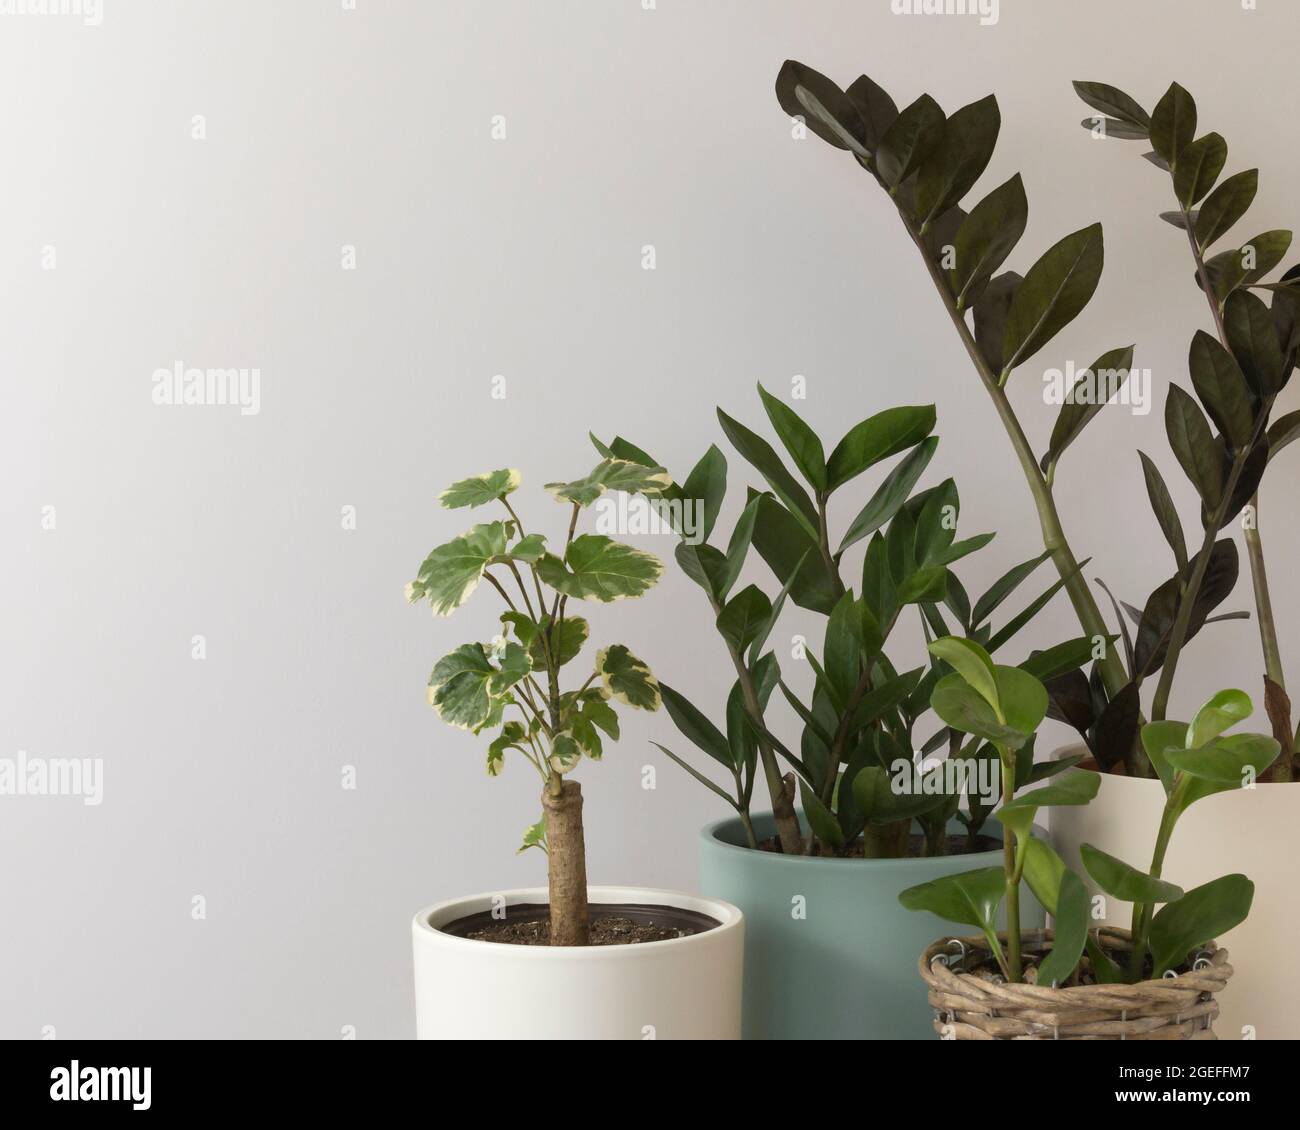 indoor plants on a gray background Stock Photo